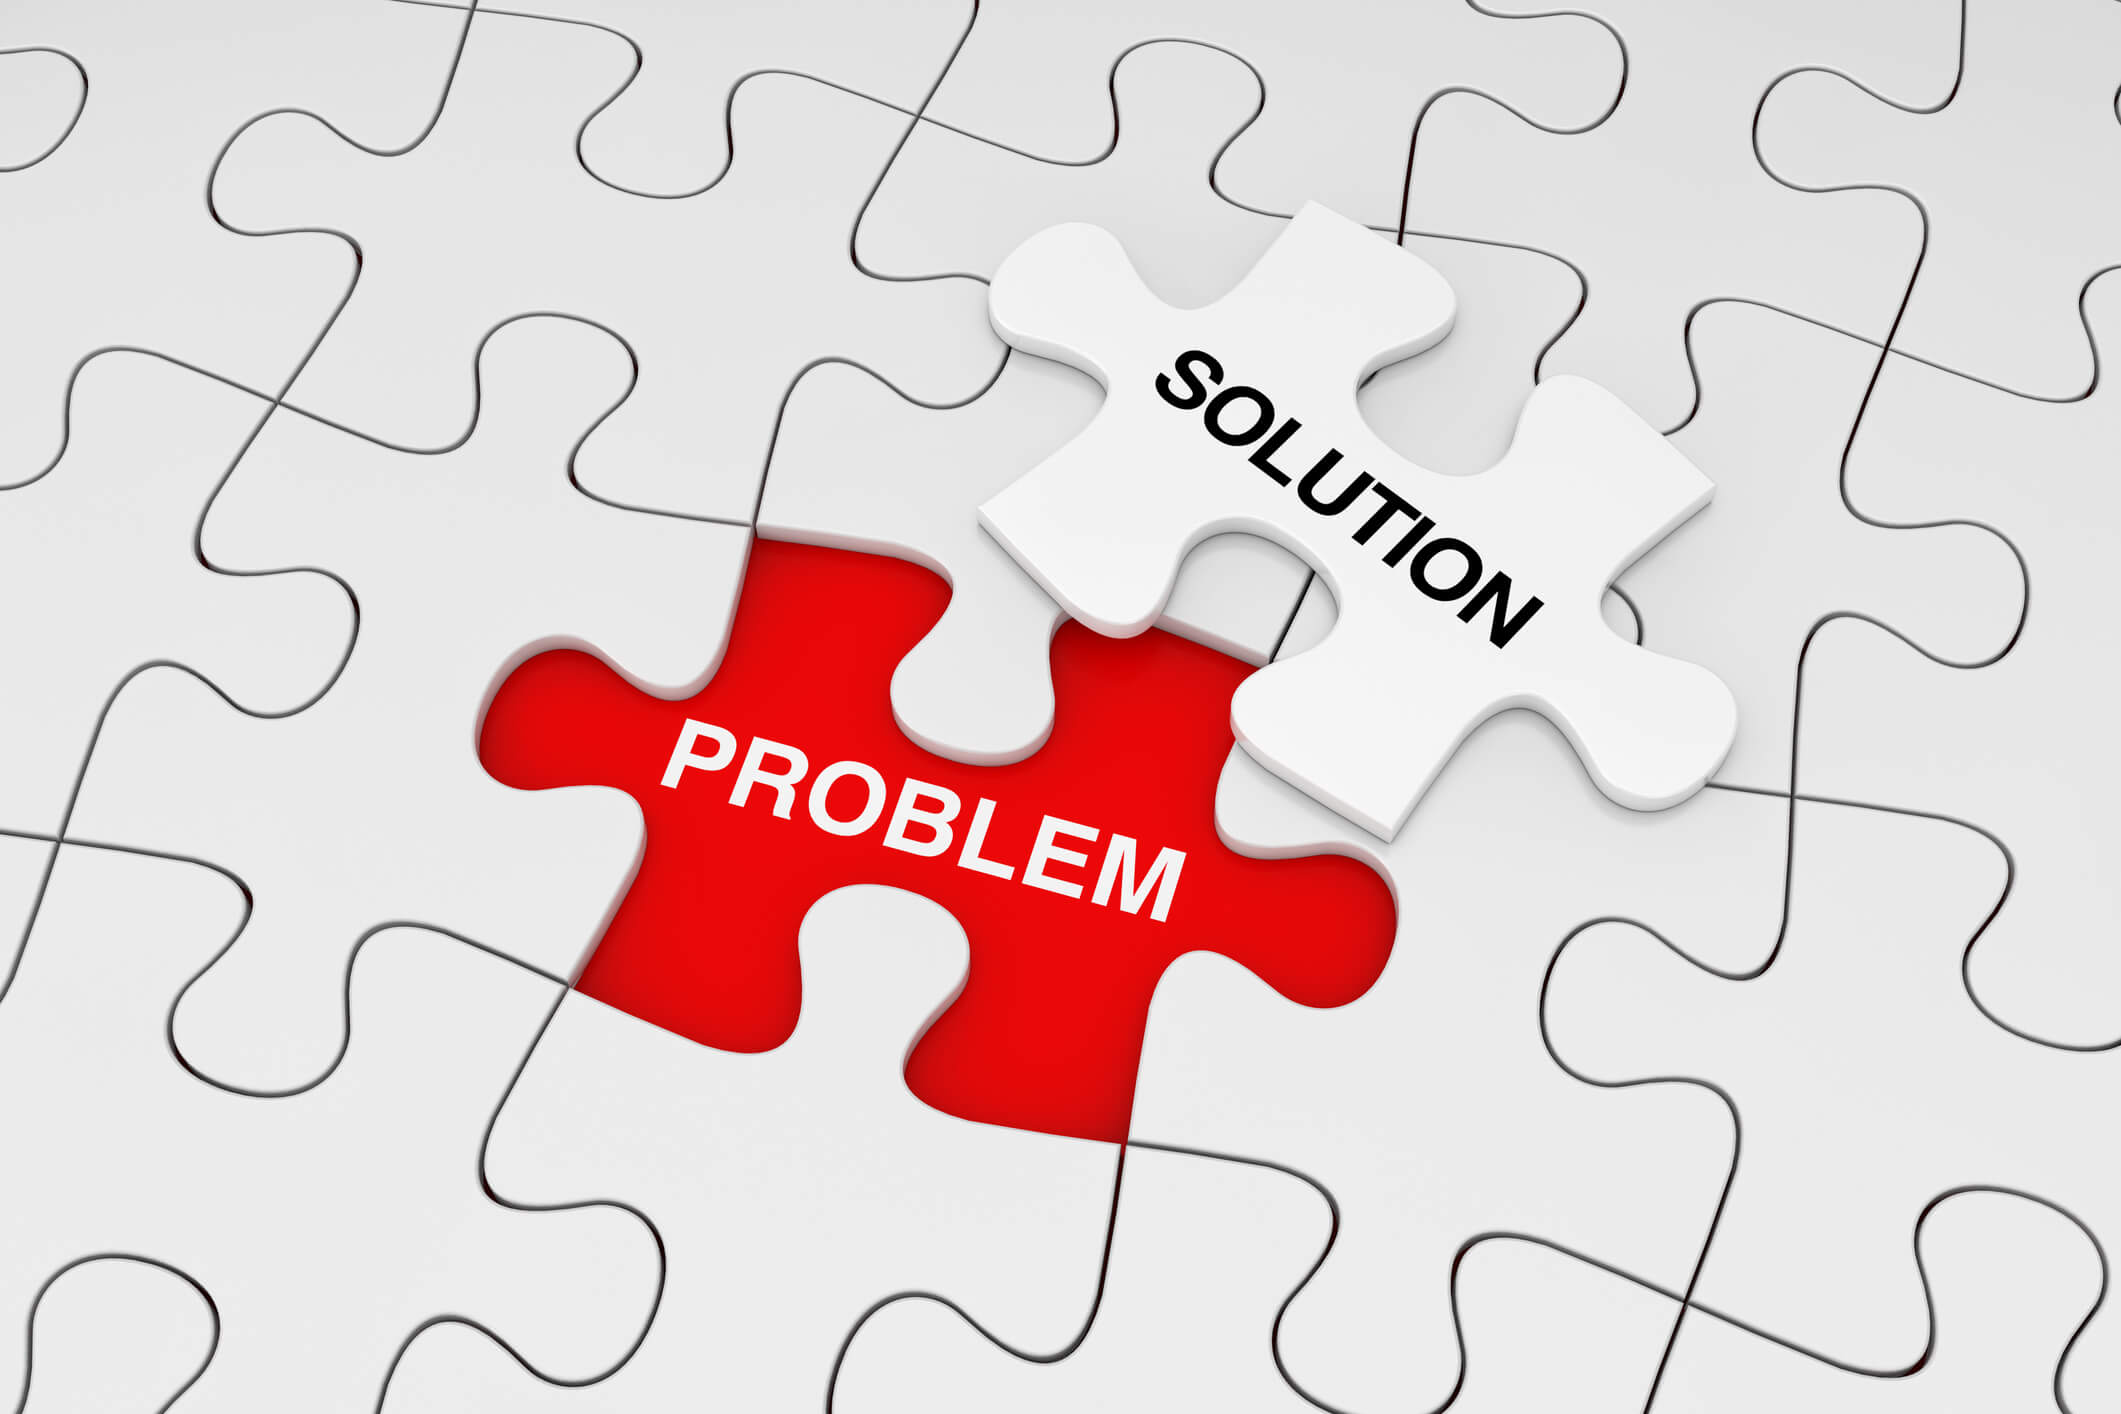 problem and solution written on puzzle pieces